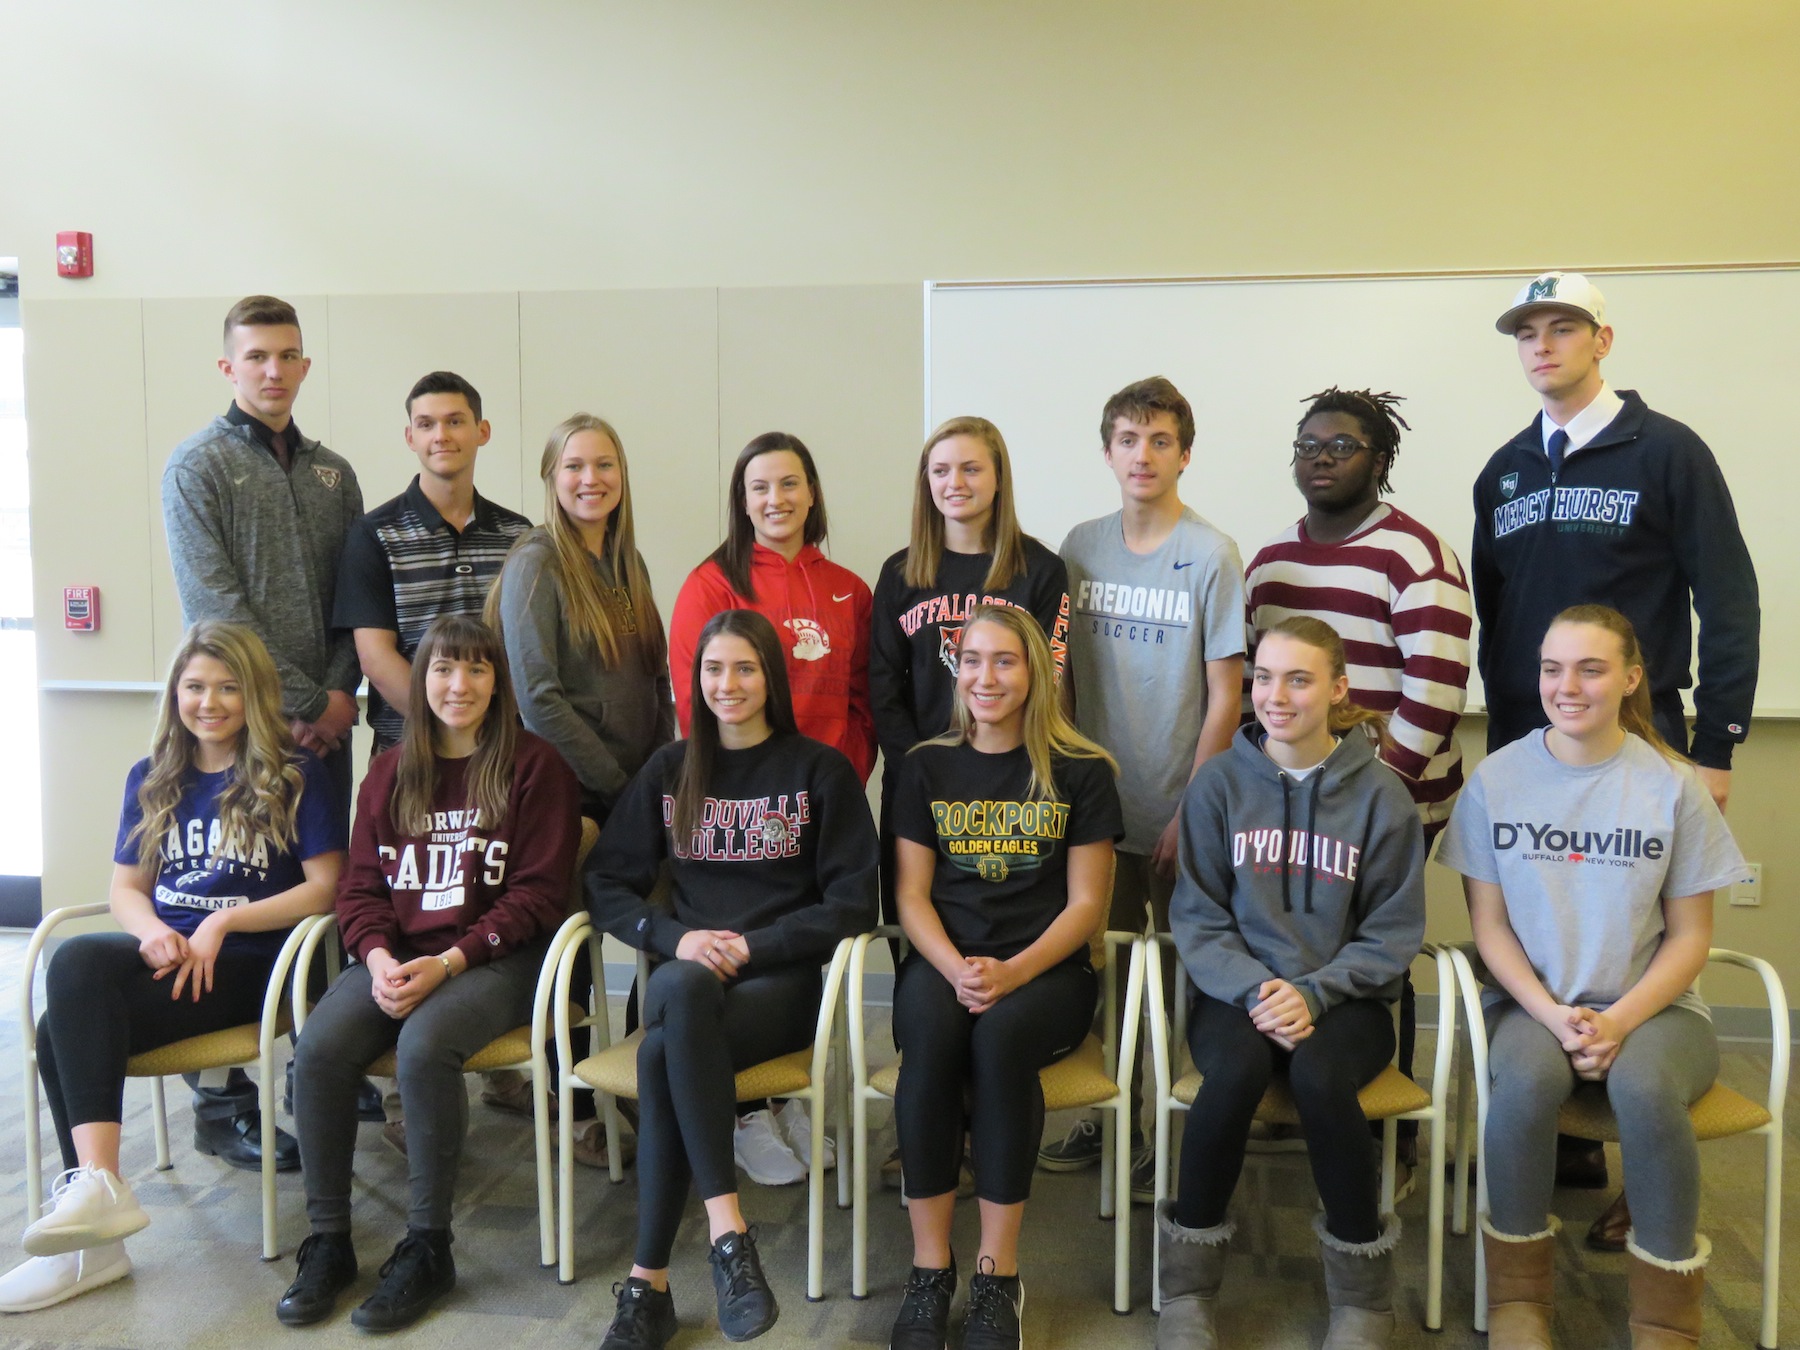 Niagara-Wheatfield student-athletes signed their letters of intent to continue their athletic careers in college. Front row, left to right; Jenna Wagoner, Sarah Carls, Tiffany Cristofanelli, Erin Wegrzyn, Carly Milleville and Mikaela Milleville. Back row, left to right; Zack Belter, Kyle Stenzel, Hallie Dworzanski, Julia Cimino, Sydney Watters, Joseph Gioannini, Josh Brown and James Filippelli. (Photo by David Yarger)  